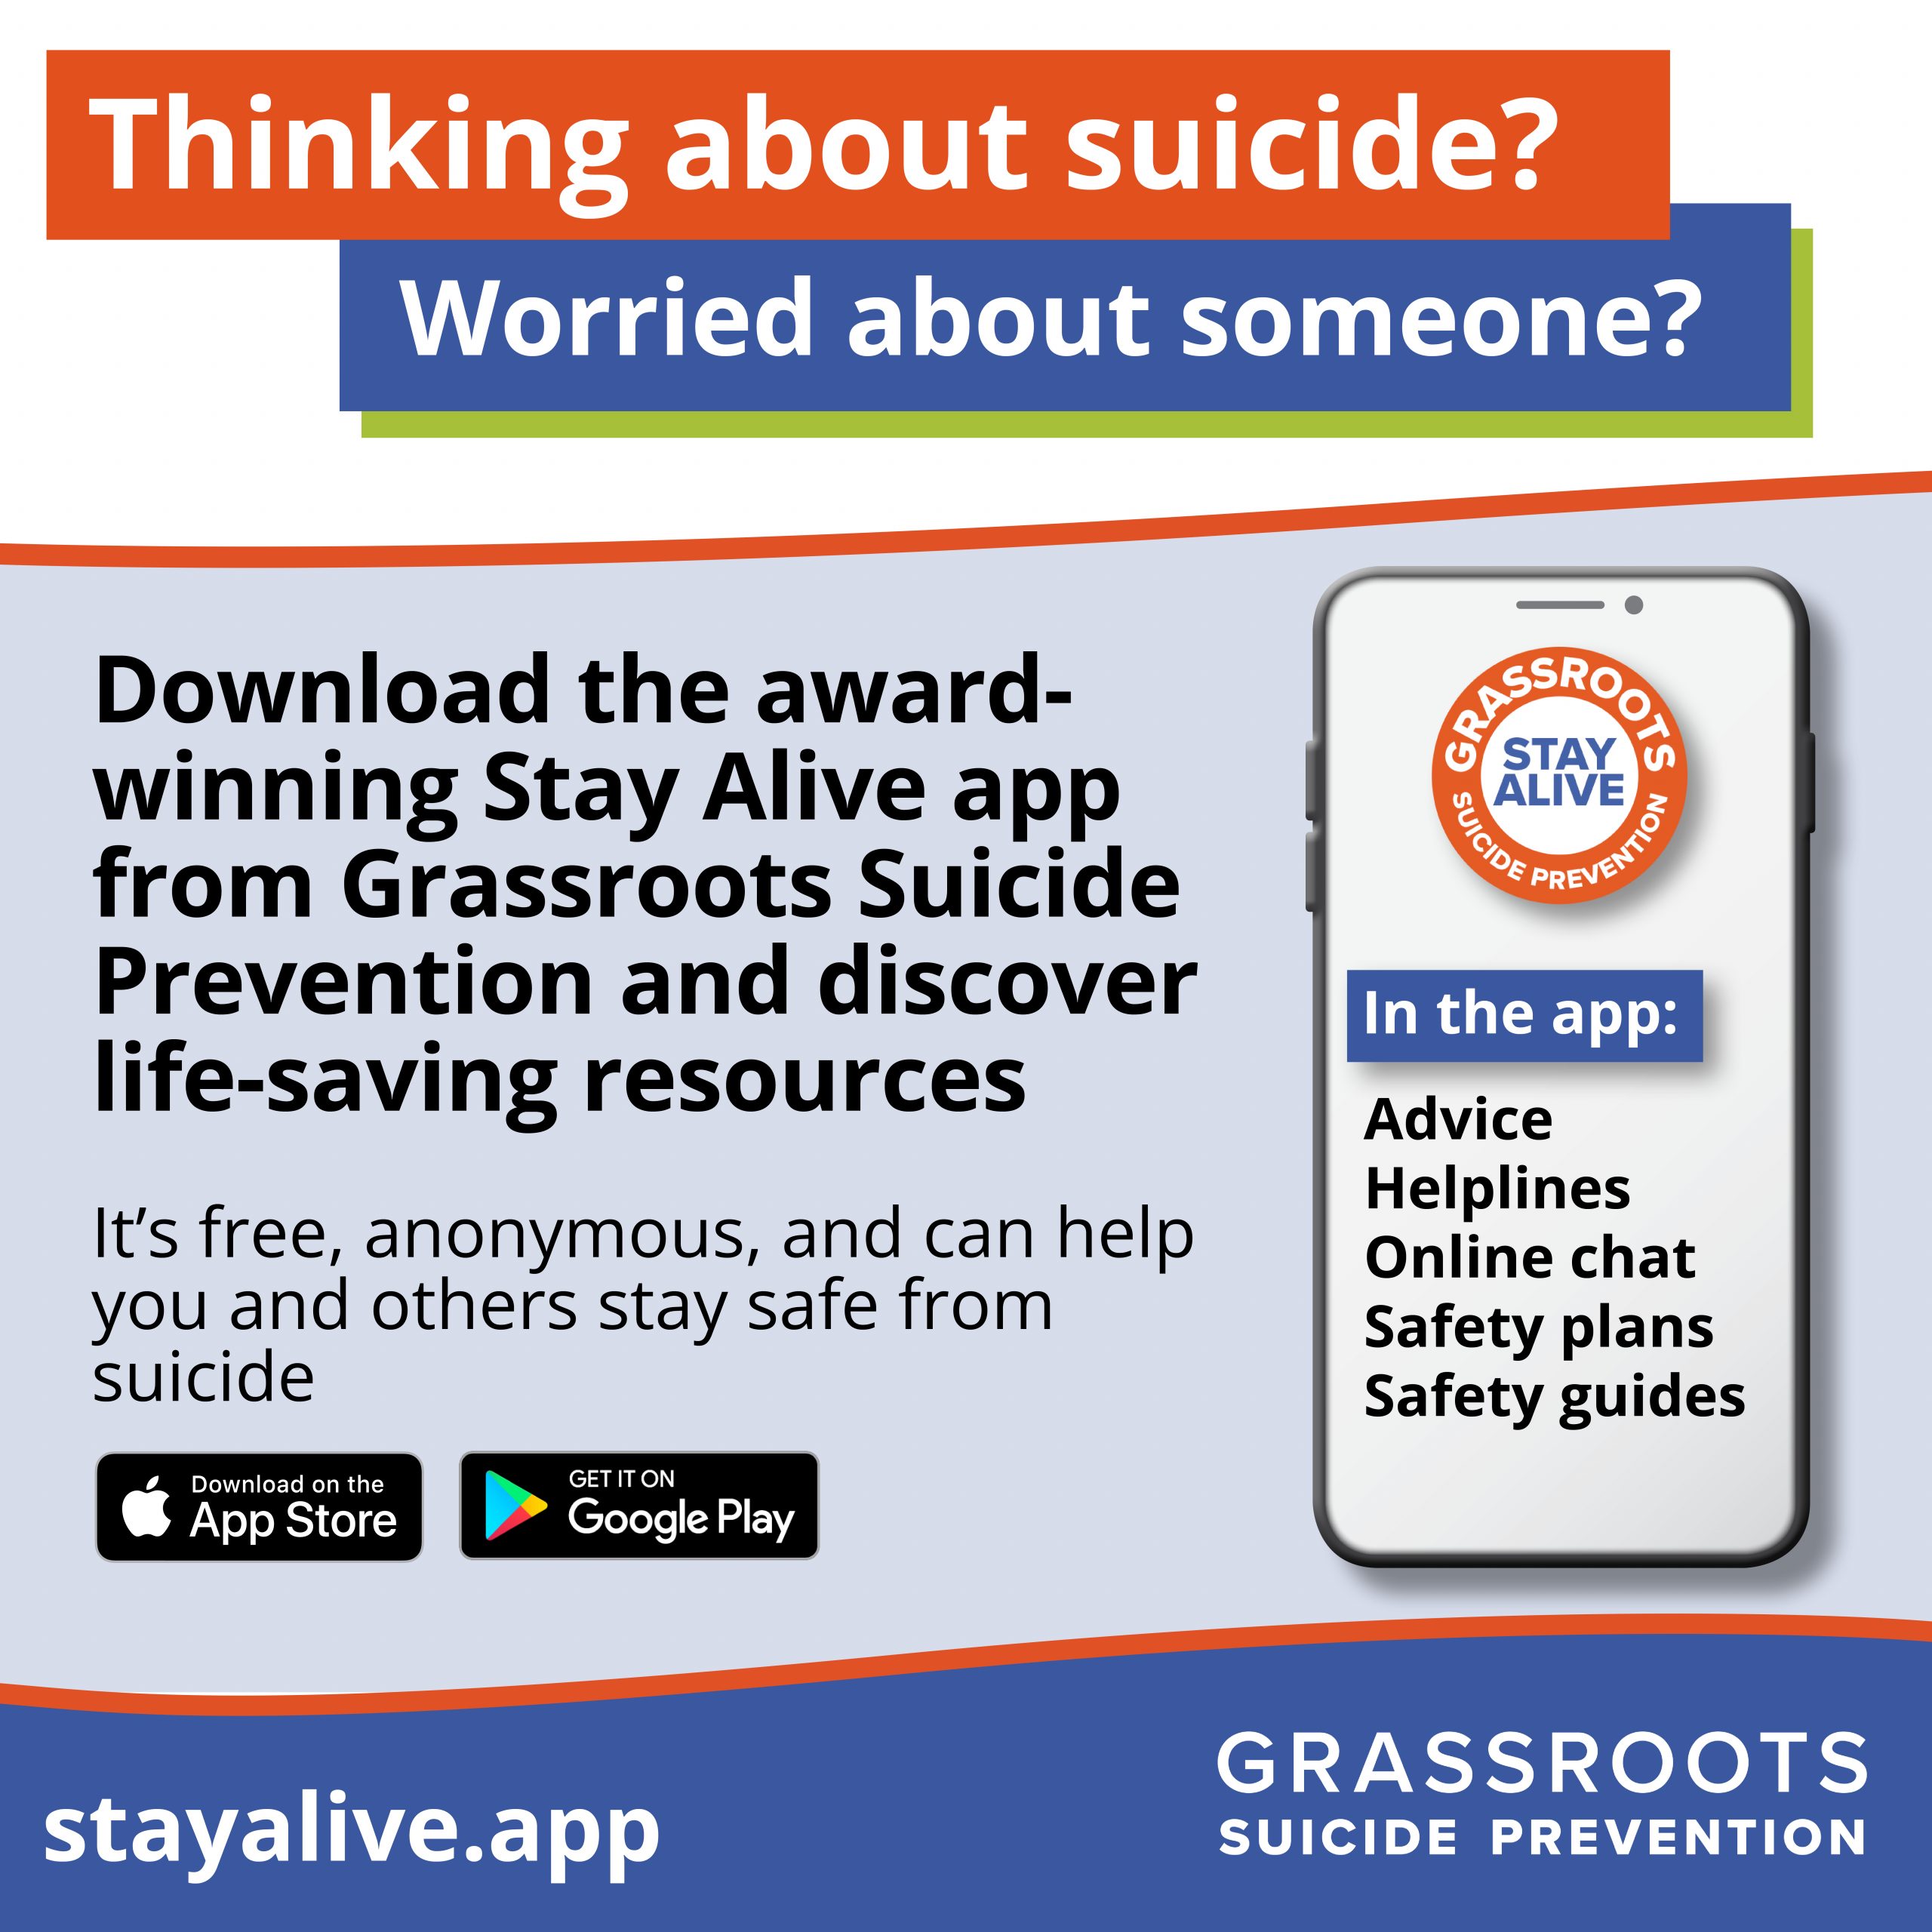 Thinking about suicide? Worried about someone? Download the award-winning Stay Alive app from Grassroots Suicide Prevention and discover life-saving resources. It's free, anonymous, and can help you and others stay safe from suicide